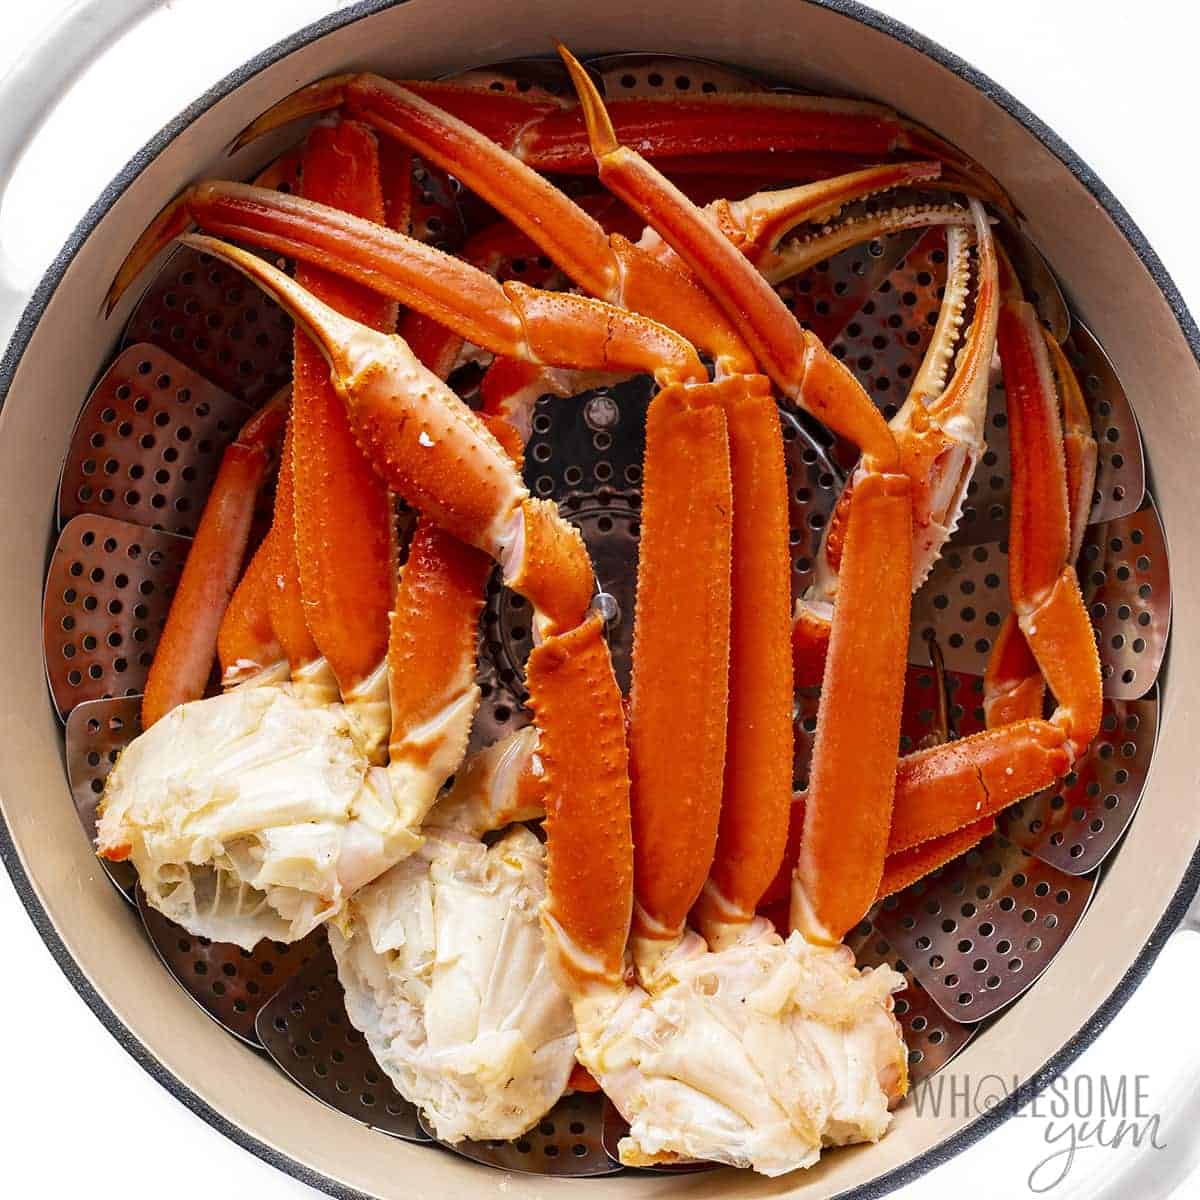 Place crab legs in steamer.